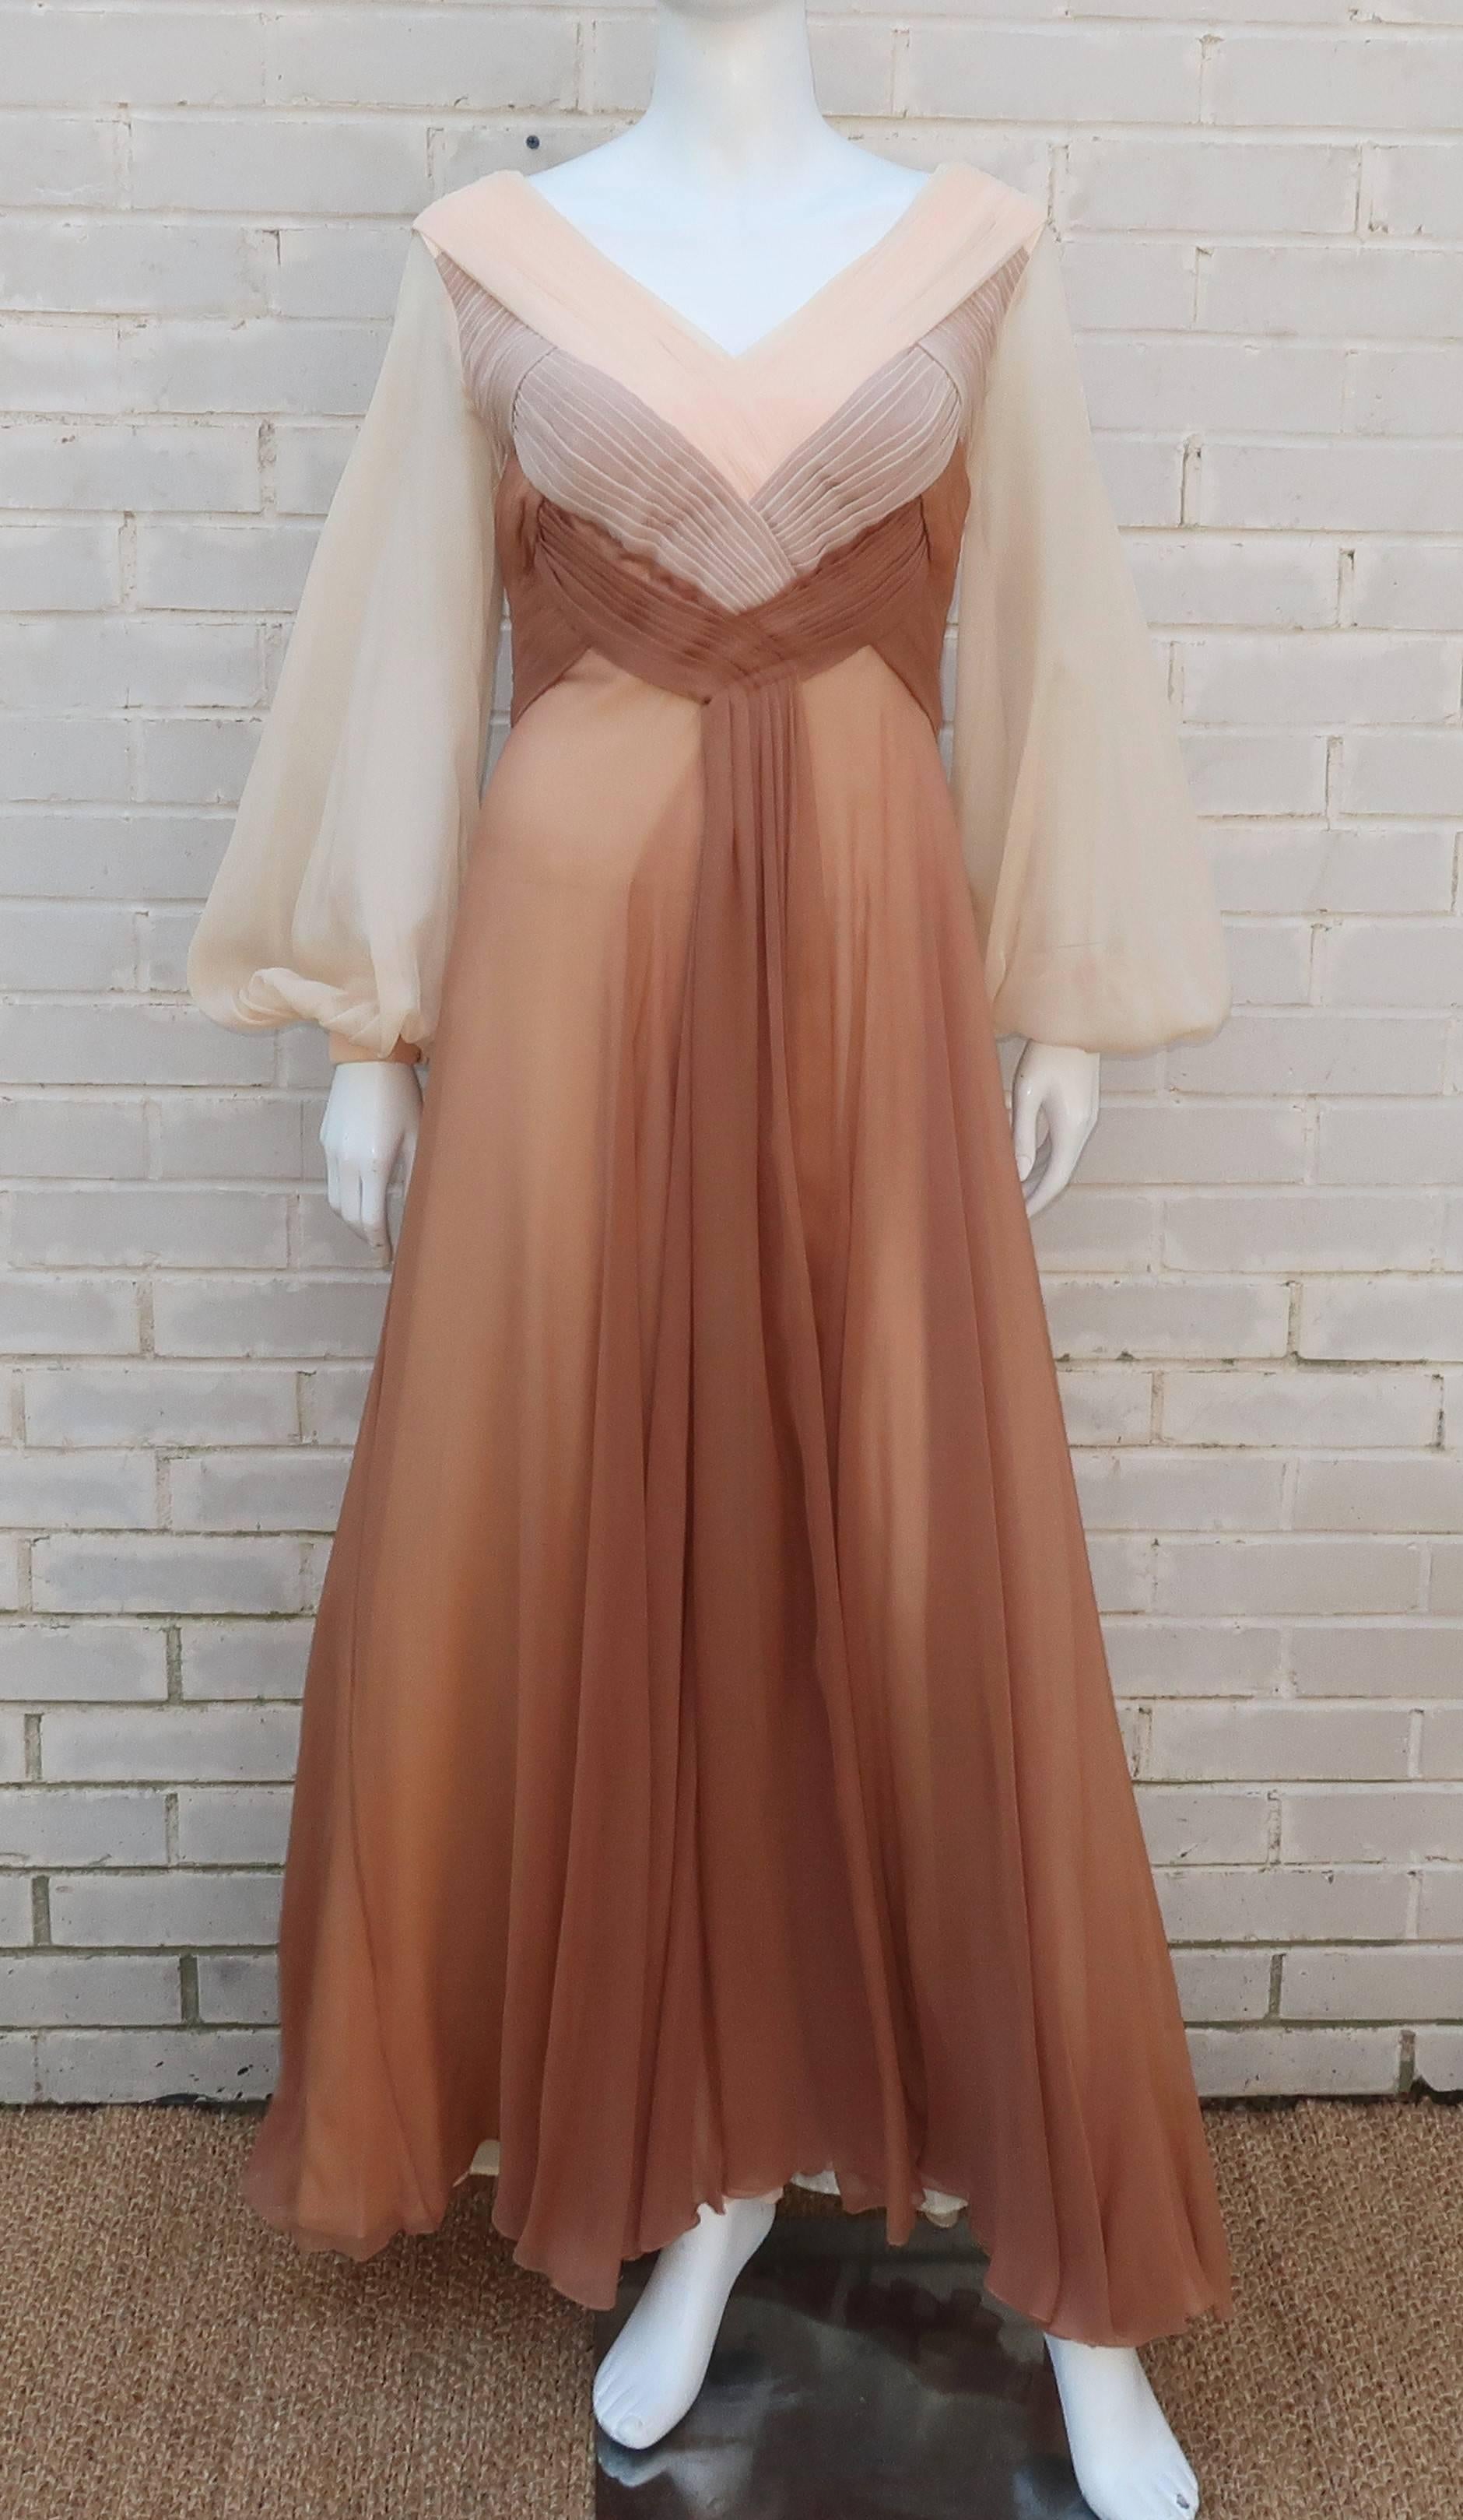 The ethereal silhouette of this C.1970 Richilene evening dress is worthy of a modern day goddess.  The dress zips and hooks at the plunging back with a crisscross style front bodice formed with intersecting flat pleats.  The varying shades of silk